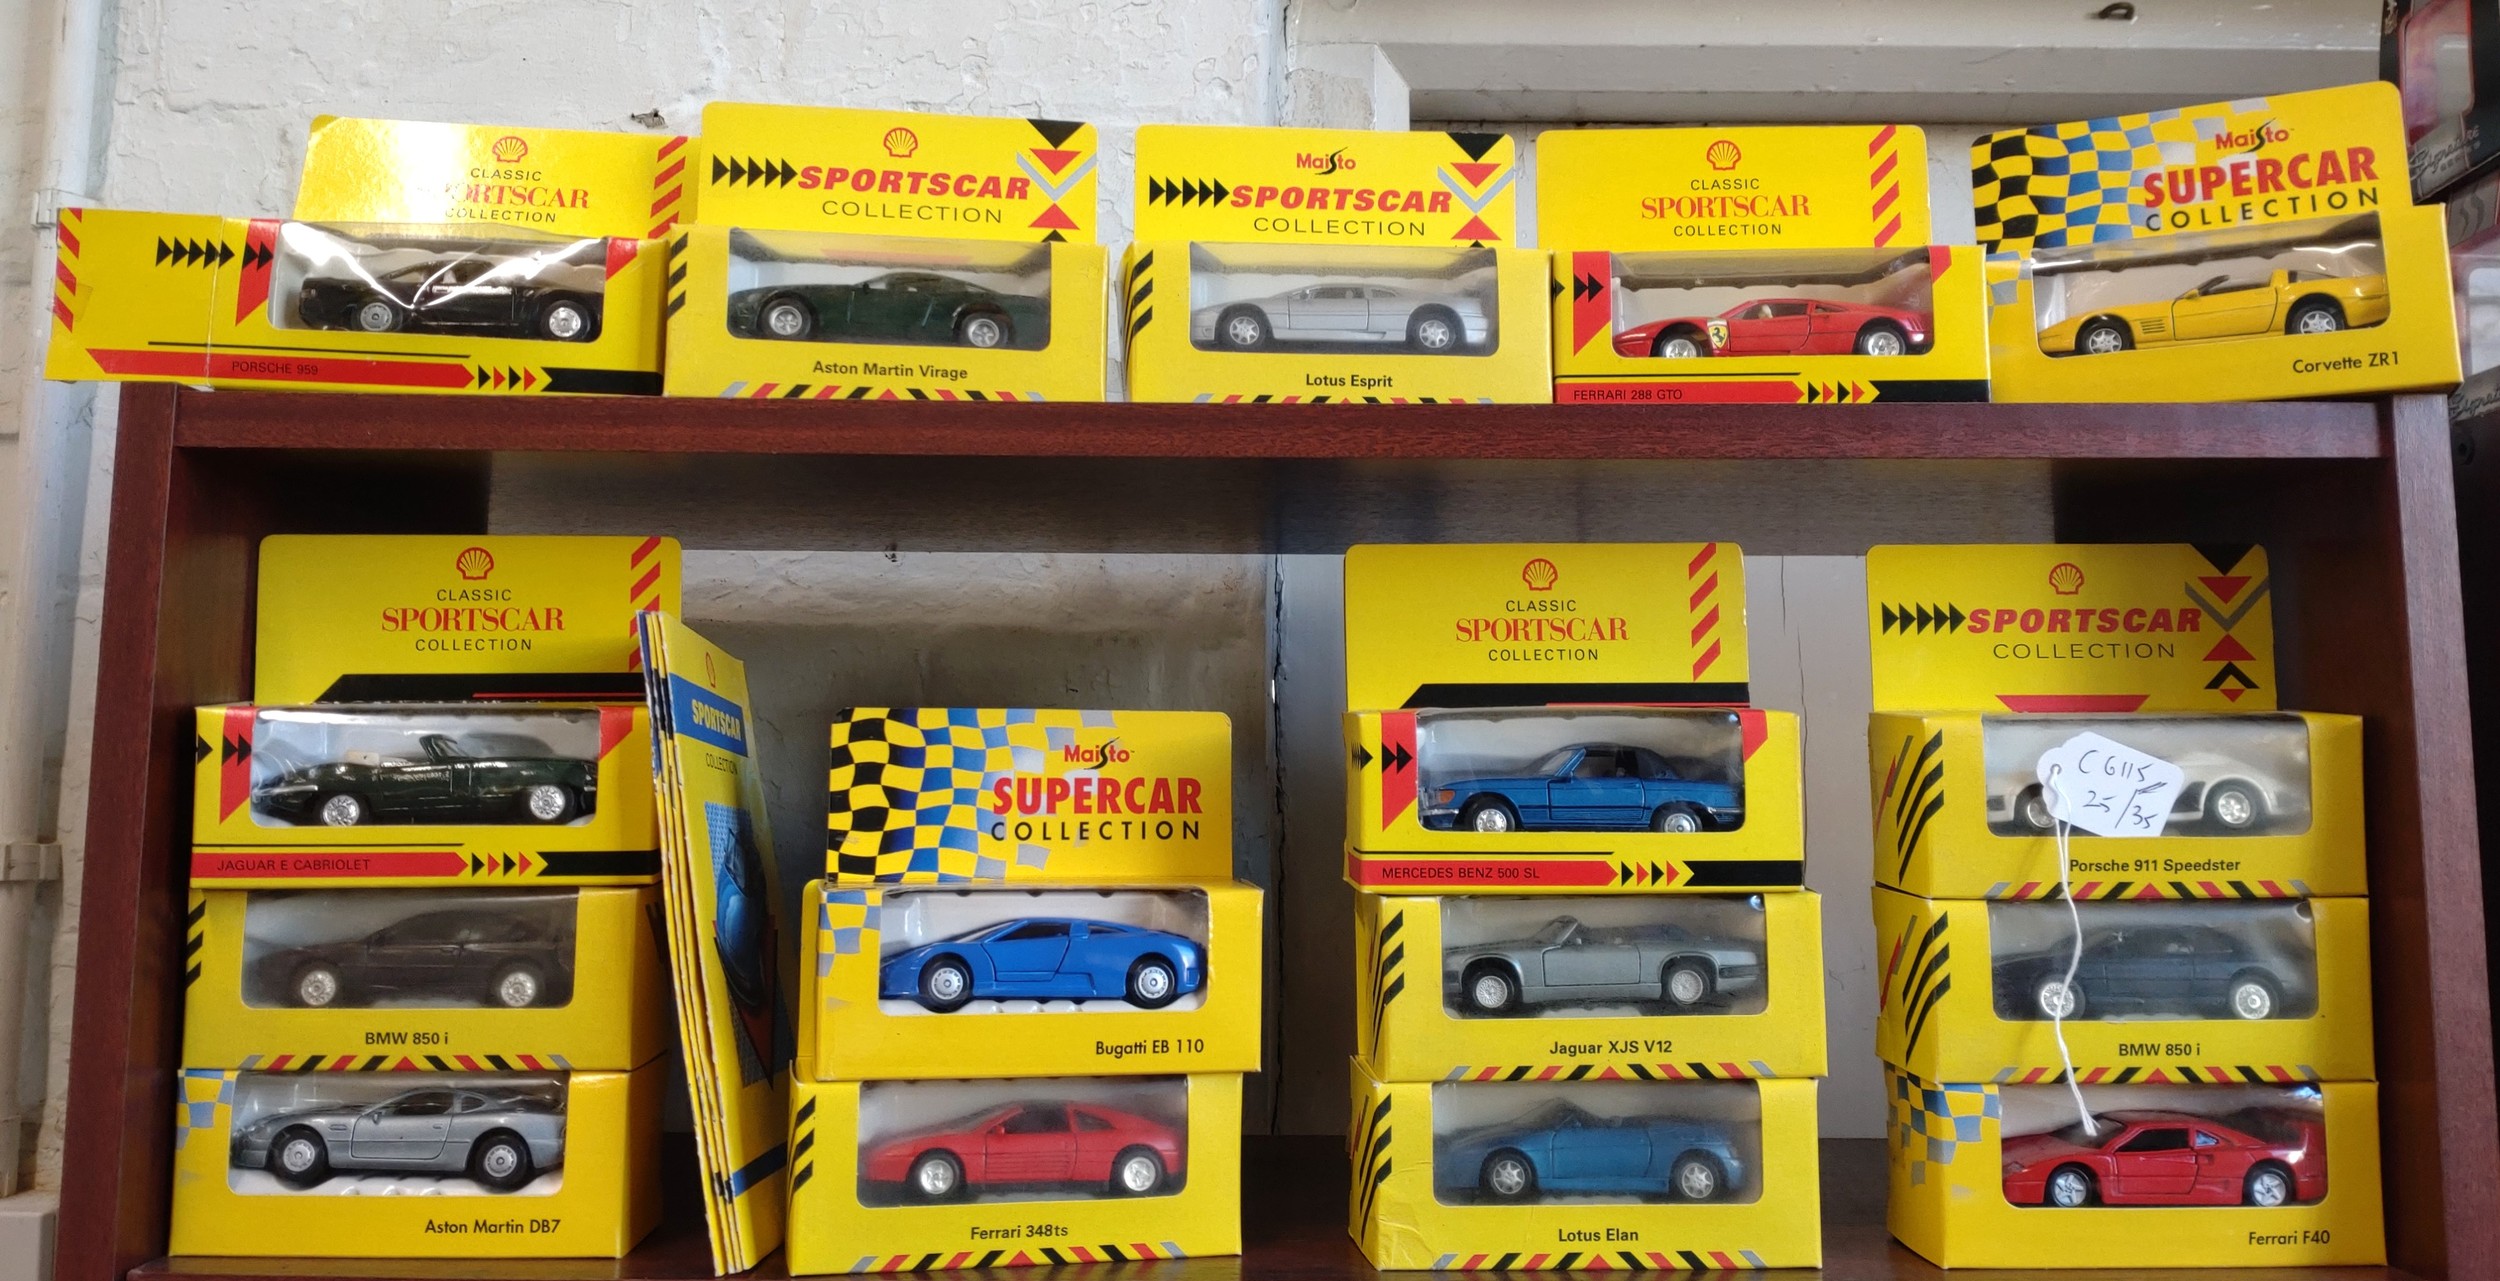 Shell and Maisto Sports Car Collection models including Aston Martin DB7 and Lotus Elan in window